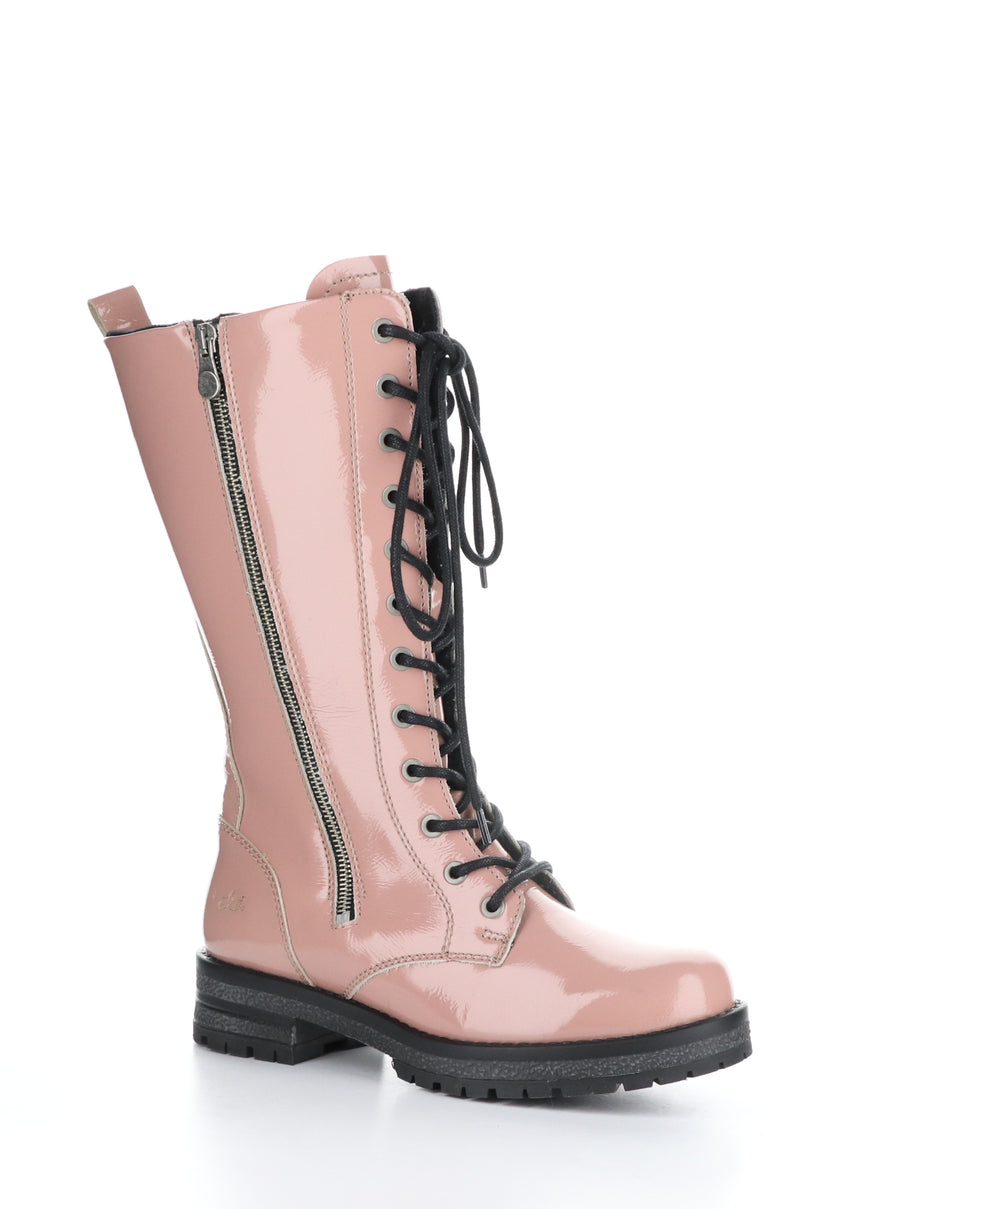 PACER PINK Round Toe Boots